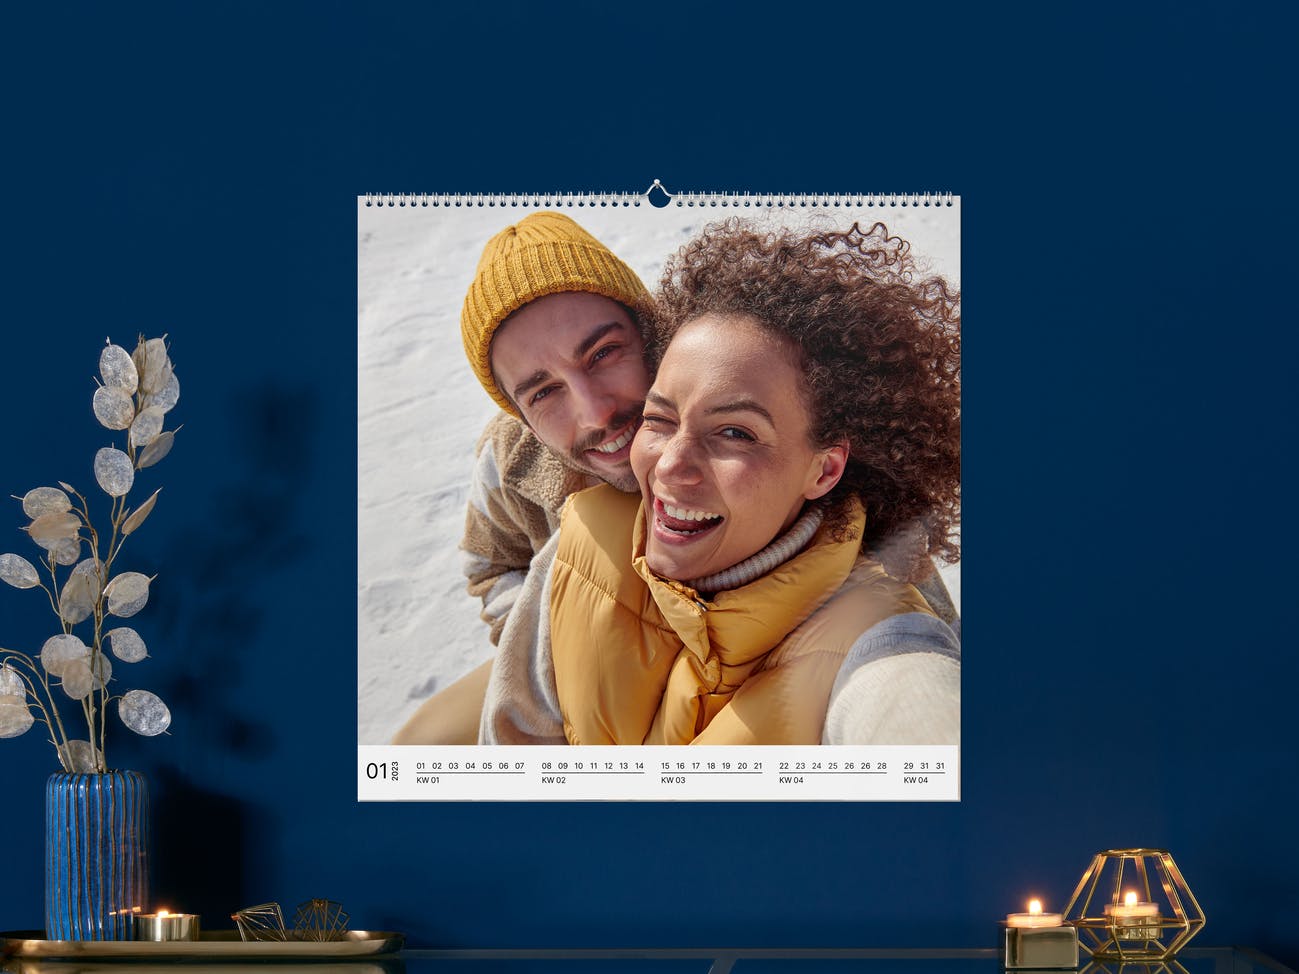 Pixum wall calendar in square format with a winter image